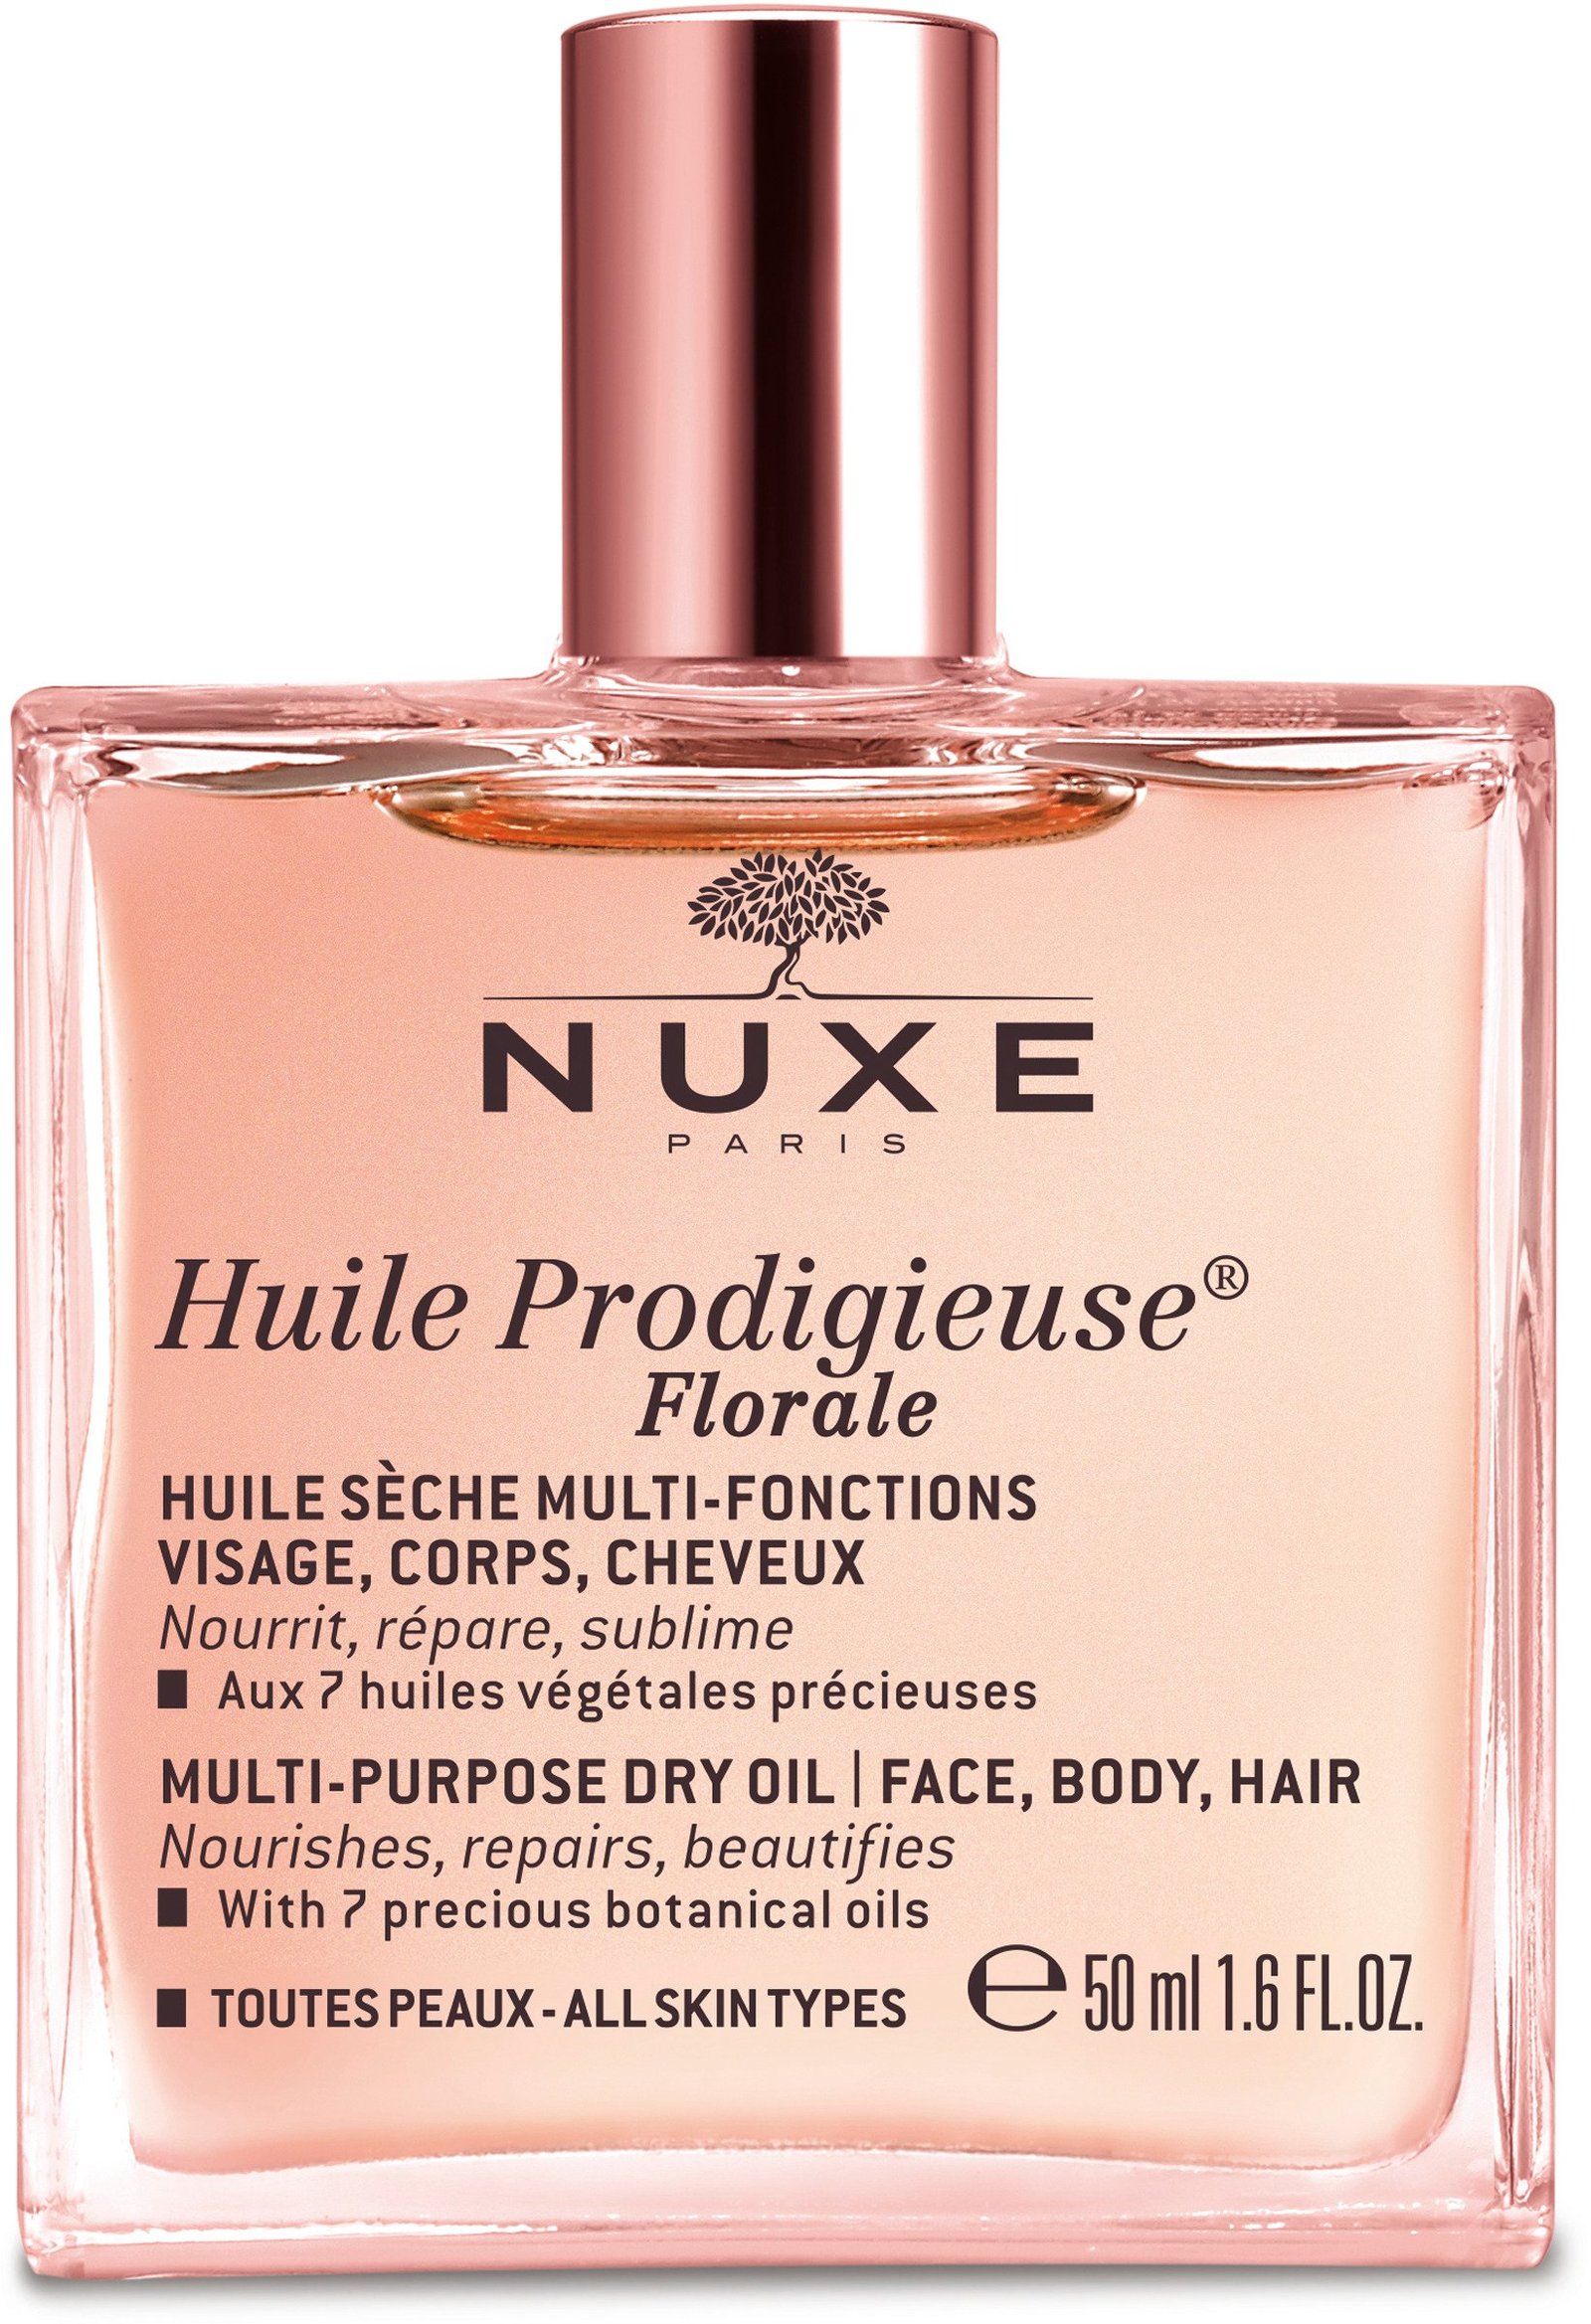 Nuxe Huile Prodigieuse® Florale Dry Oil 50 ml